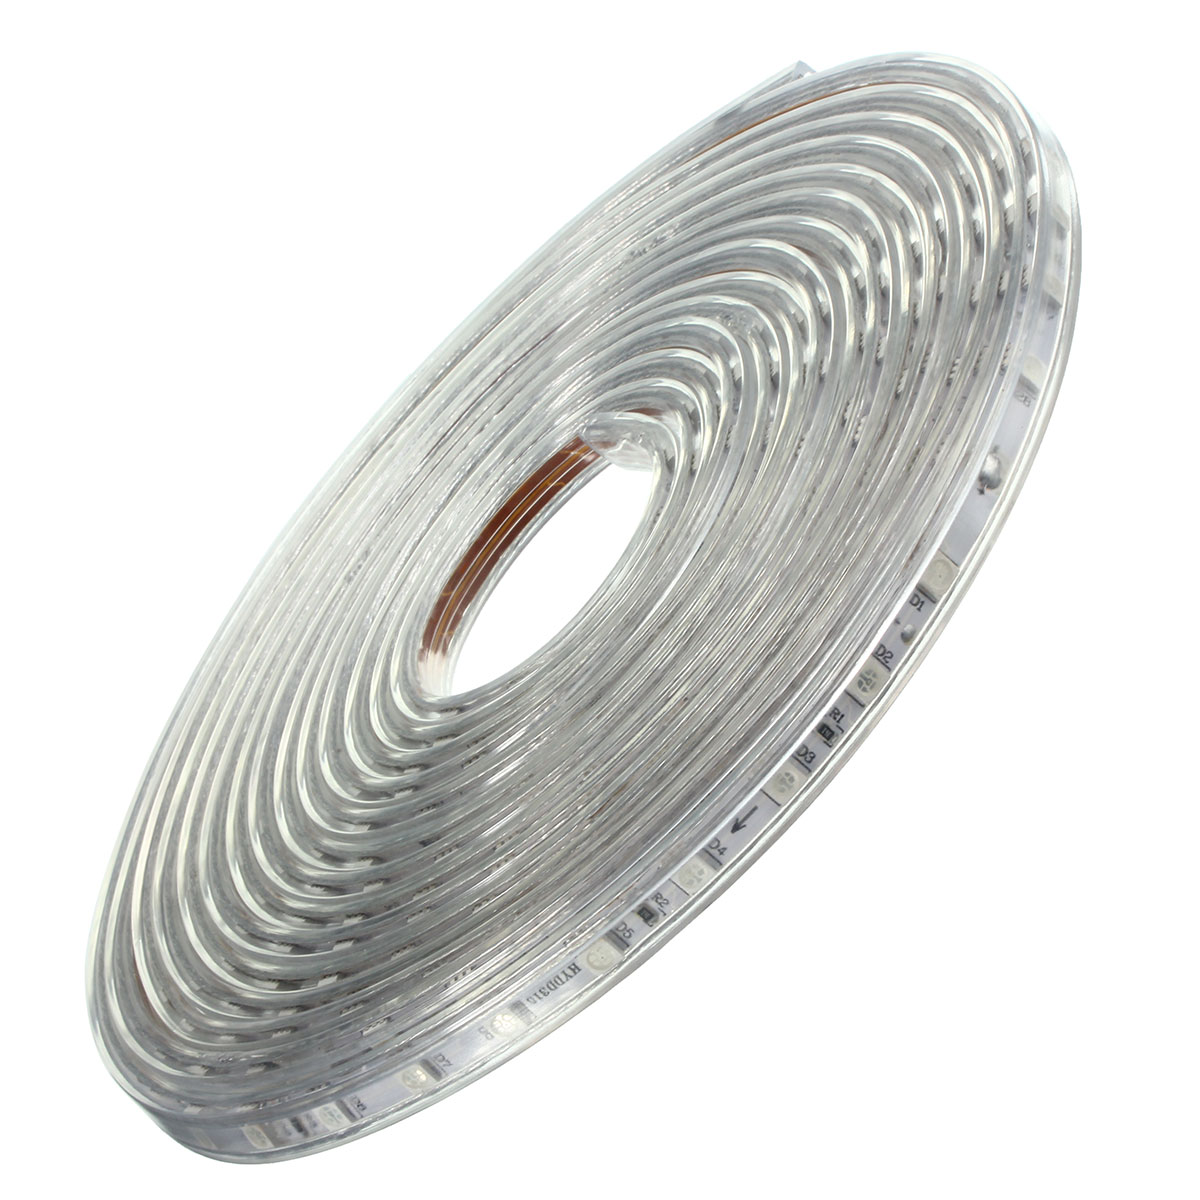 6M-5050-LED-SMD-Outdoor-Waterproof-Flexible-Tape-Rope-Strip-Light-Xmas-220V-1066362-2